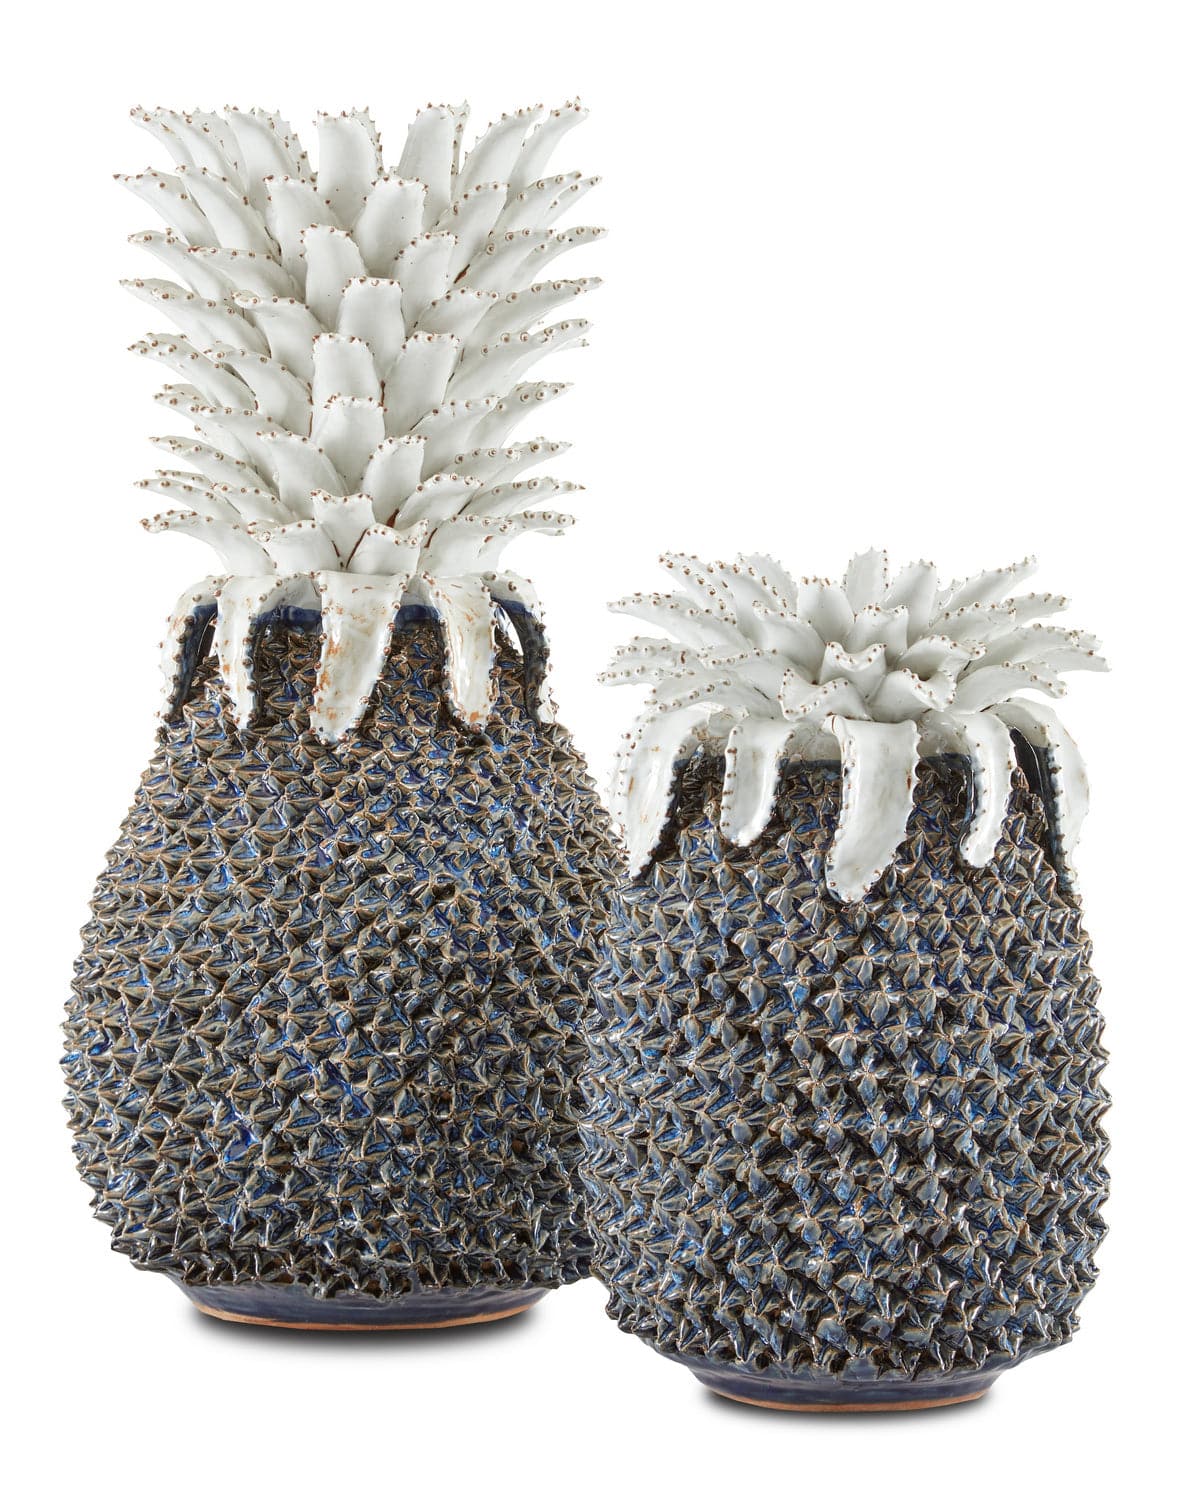 Pineapple from the Waikiki collection in Blue/White finish